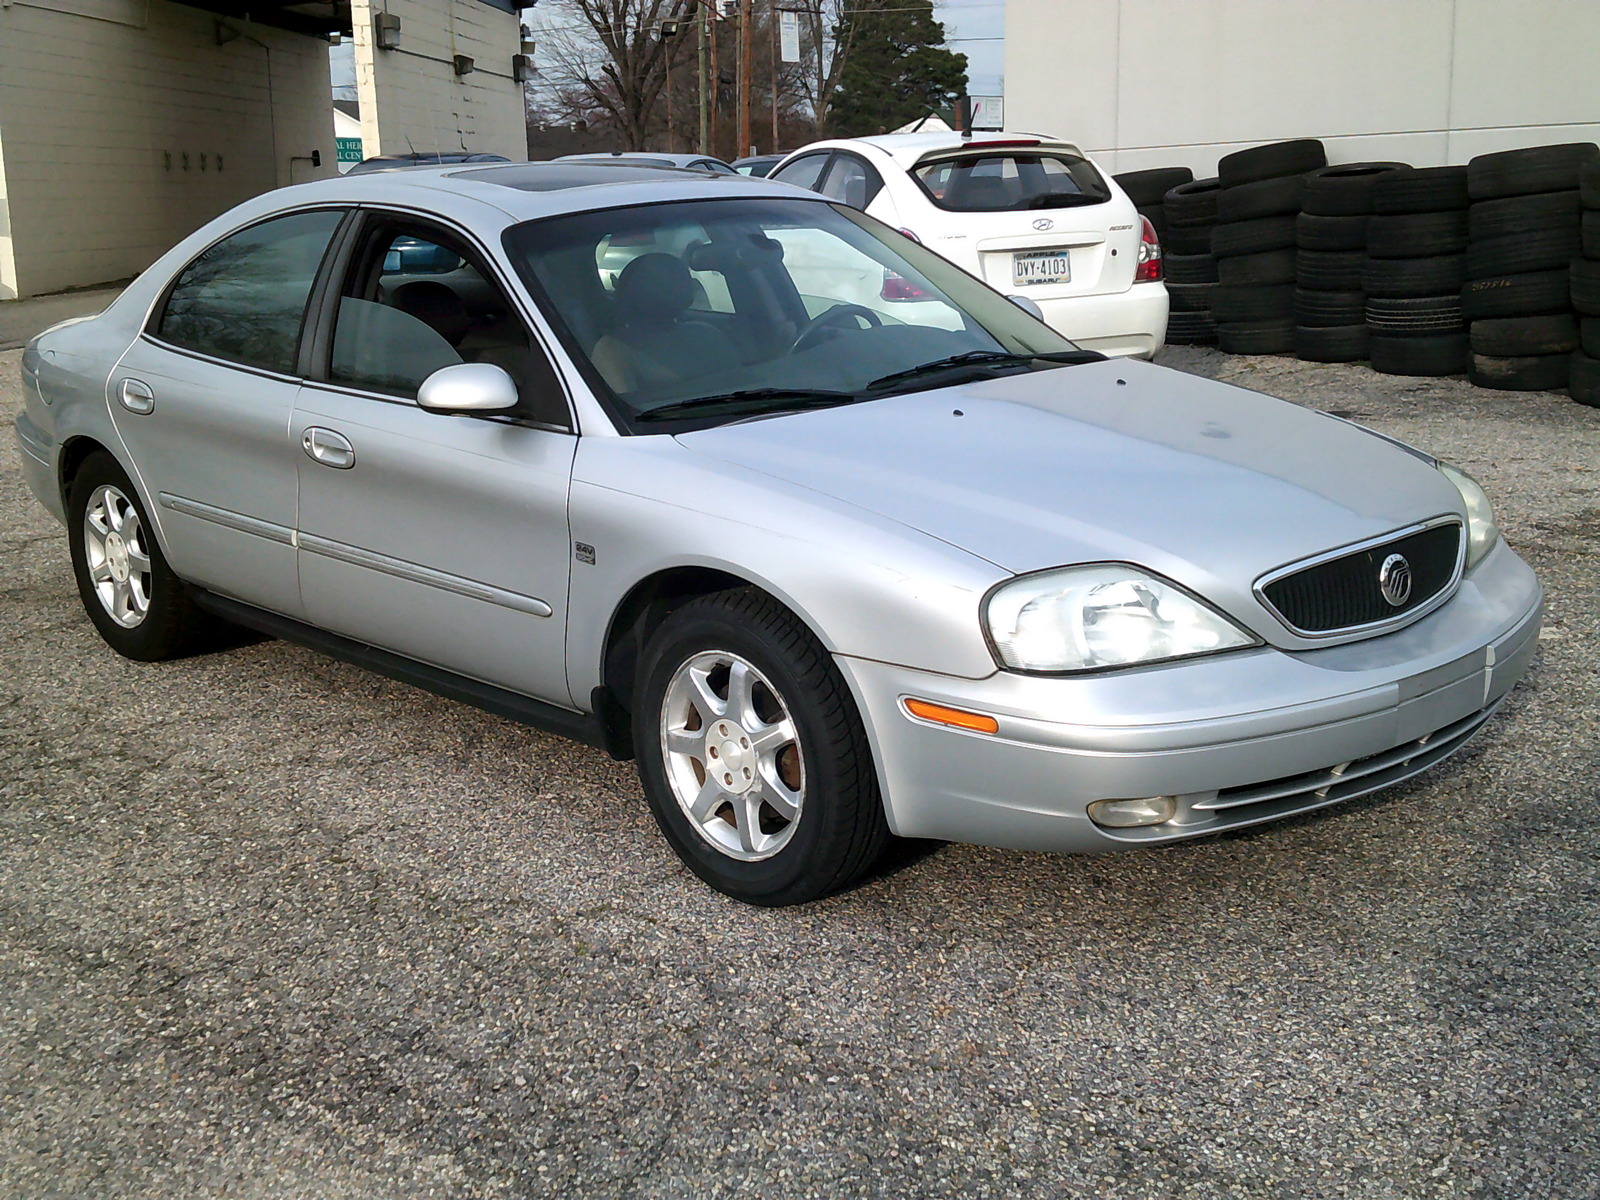 Used Mercury Sable for Sale in Richmond, VA (Test Drive at Home) - Kelley  Blue Book